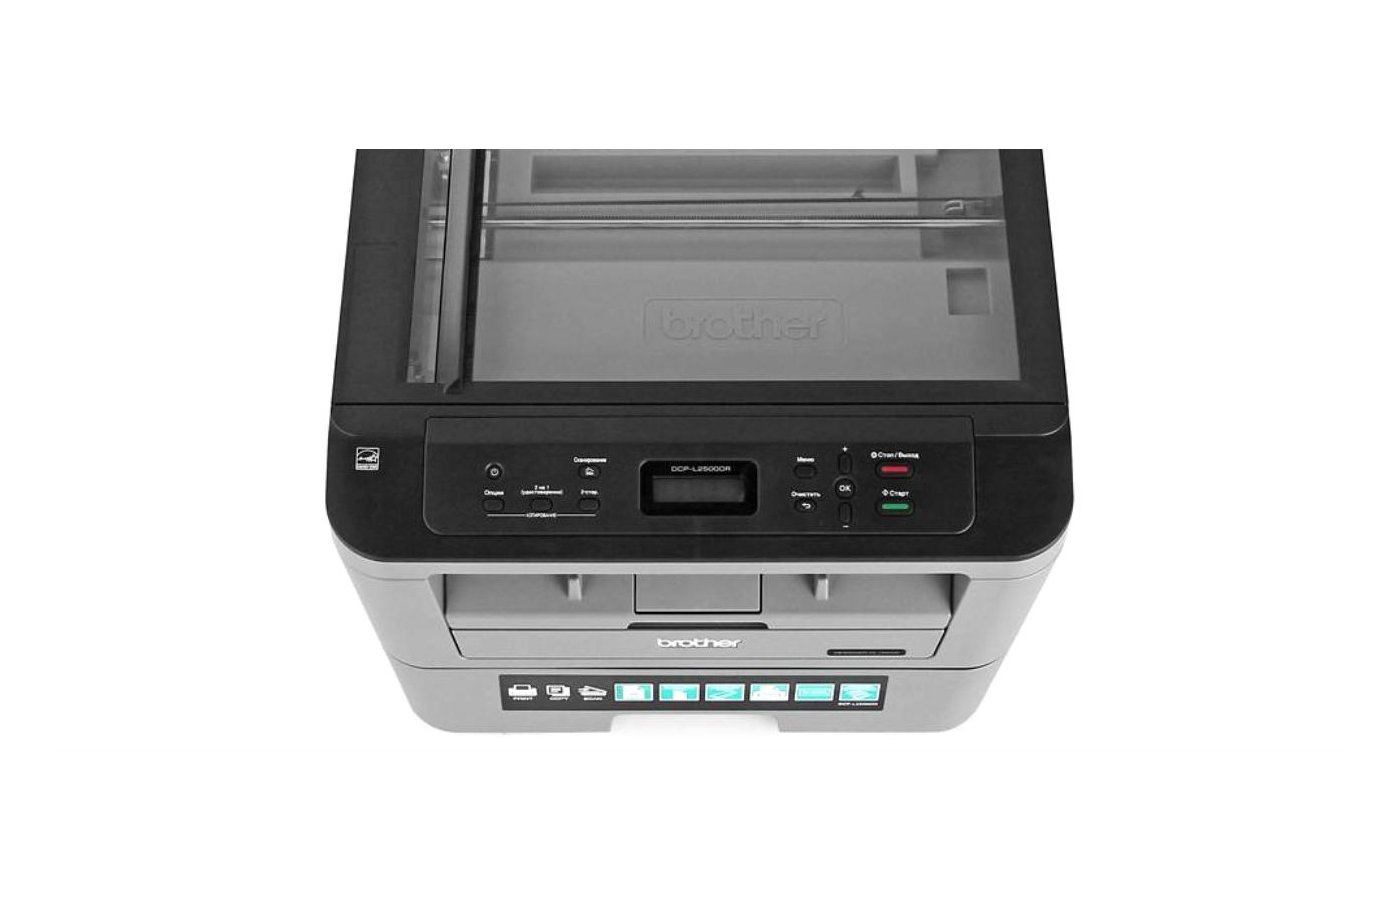 Brother dcp 2500dr. Brother DCP-l2500. Brother DCP-l2500dr. Принтер brother DCP l2500dr.